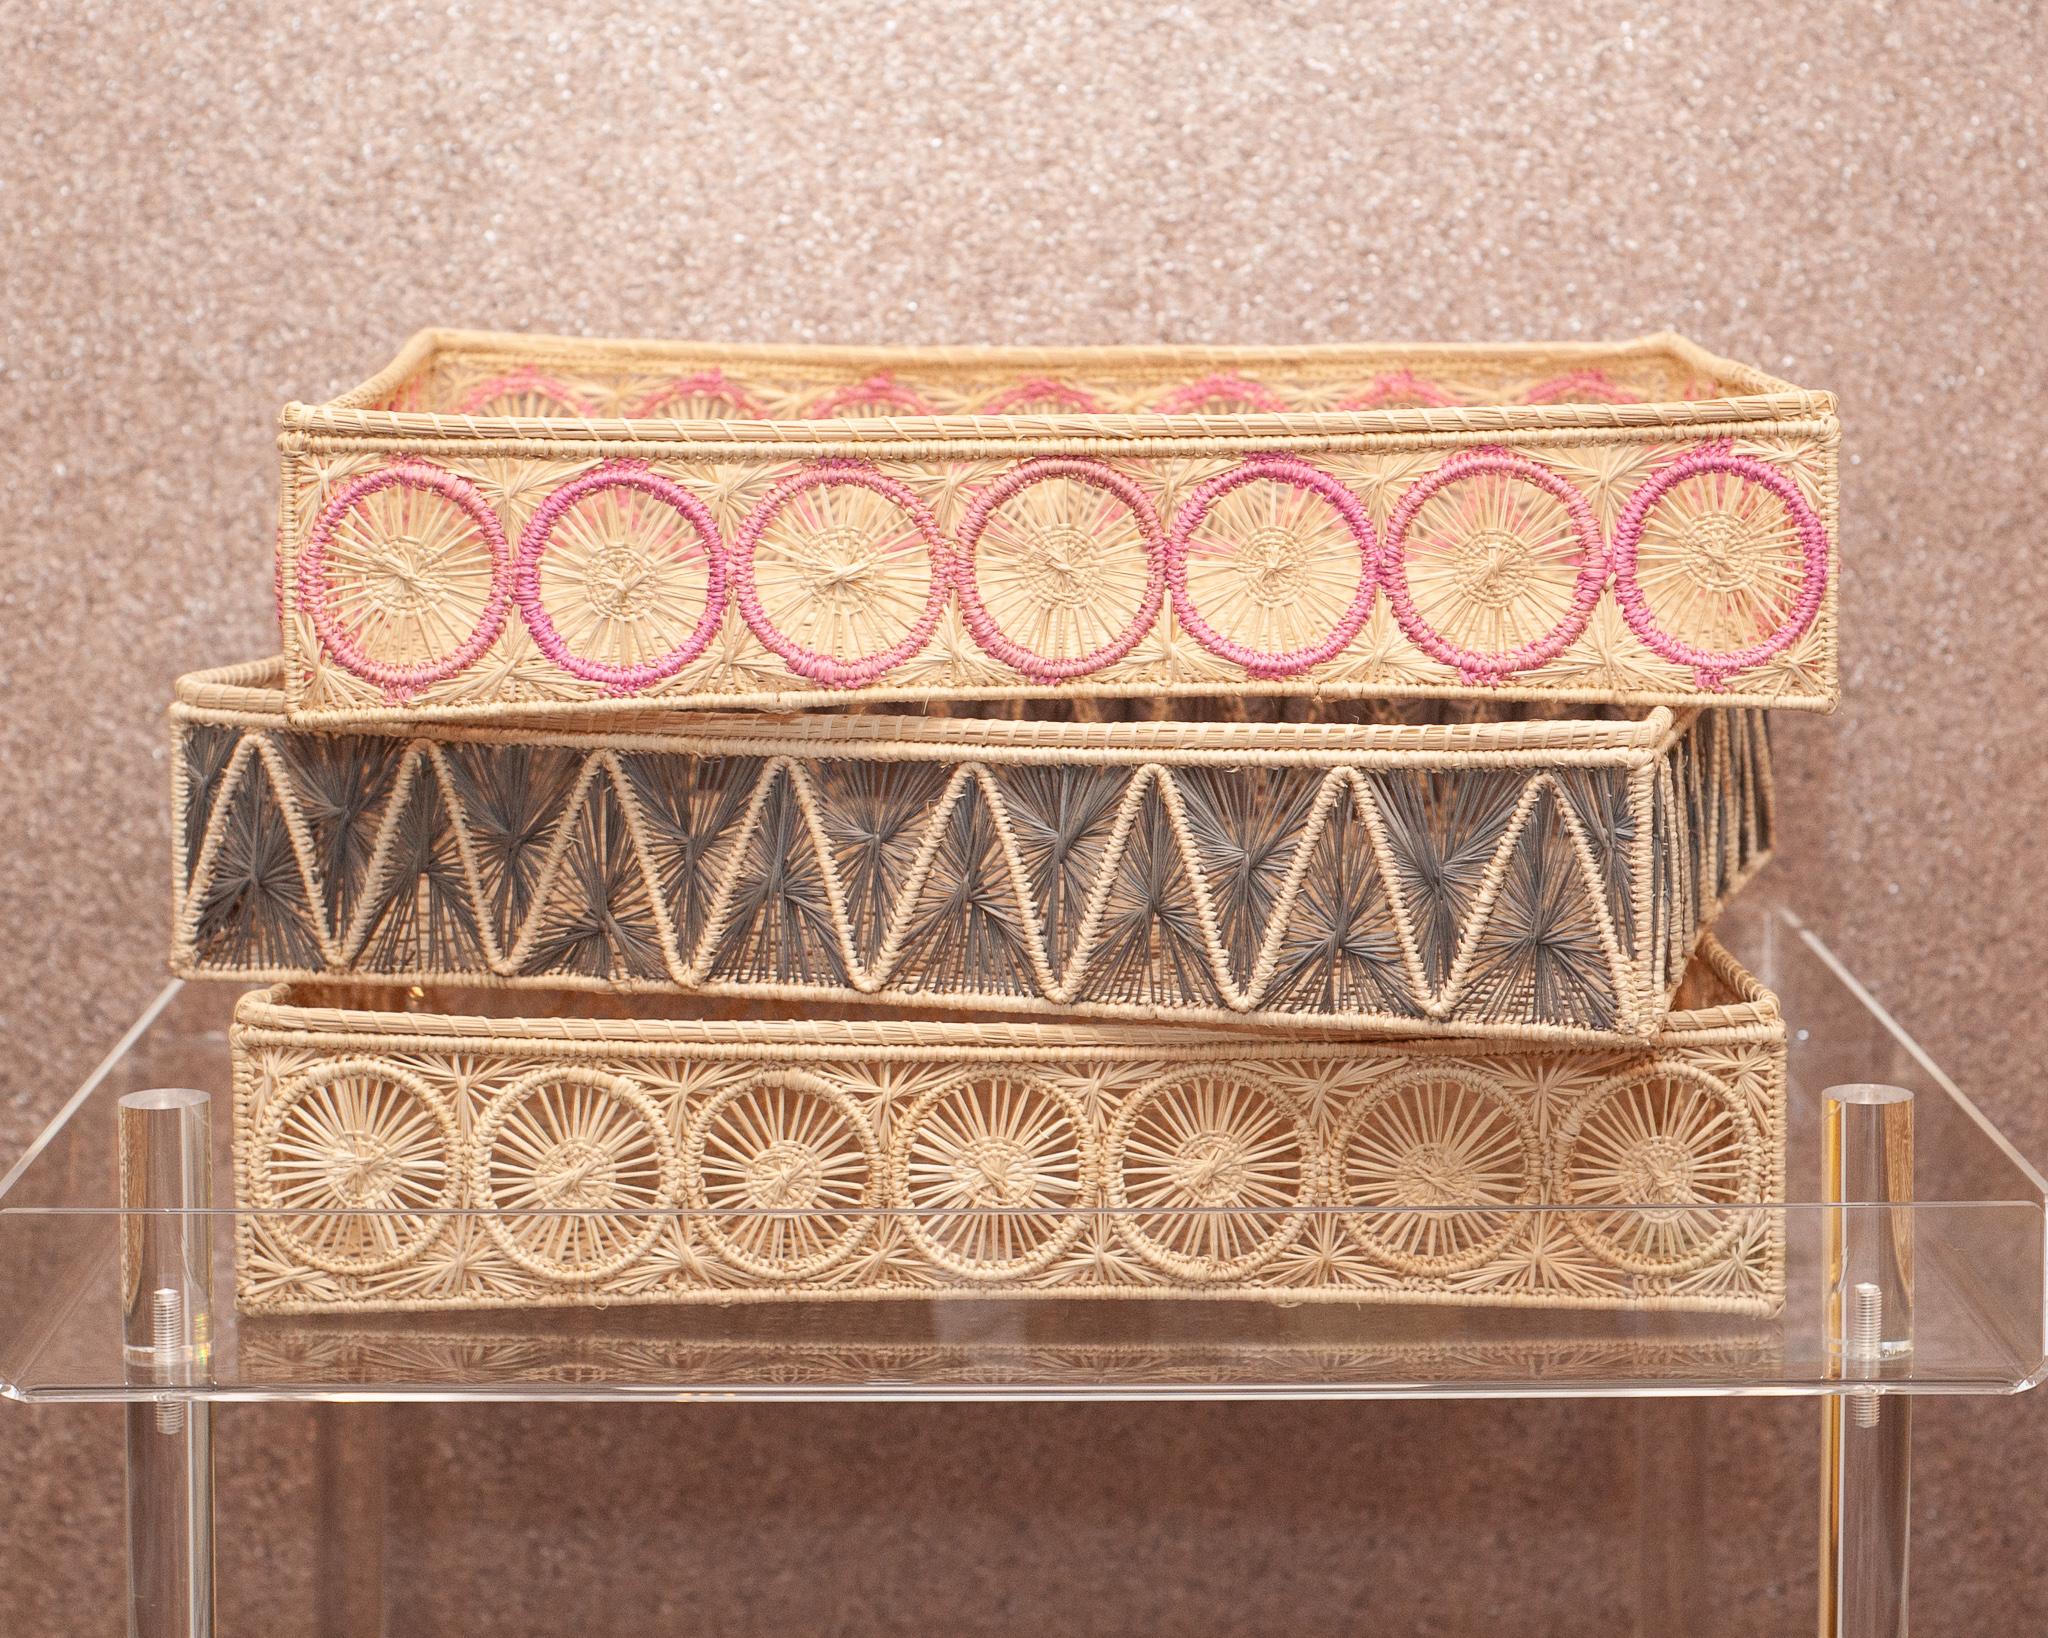 Uplift your table with these stunning handwoven rattan baskets / trays in natural and pink rattan. Finely crafted by expert artisans, these pieces all showcase the classical technique of weaving in a modern way. From Jean Michel Frank to the House